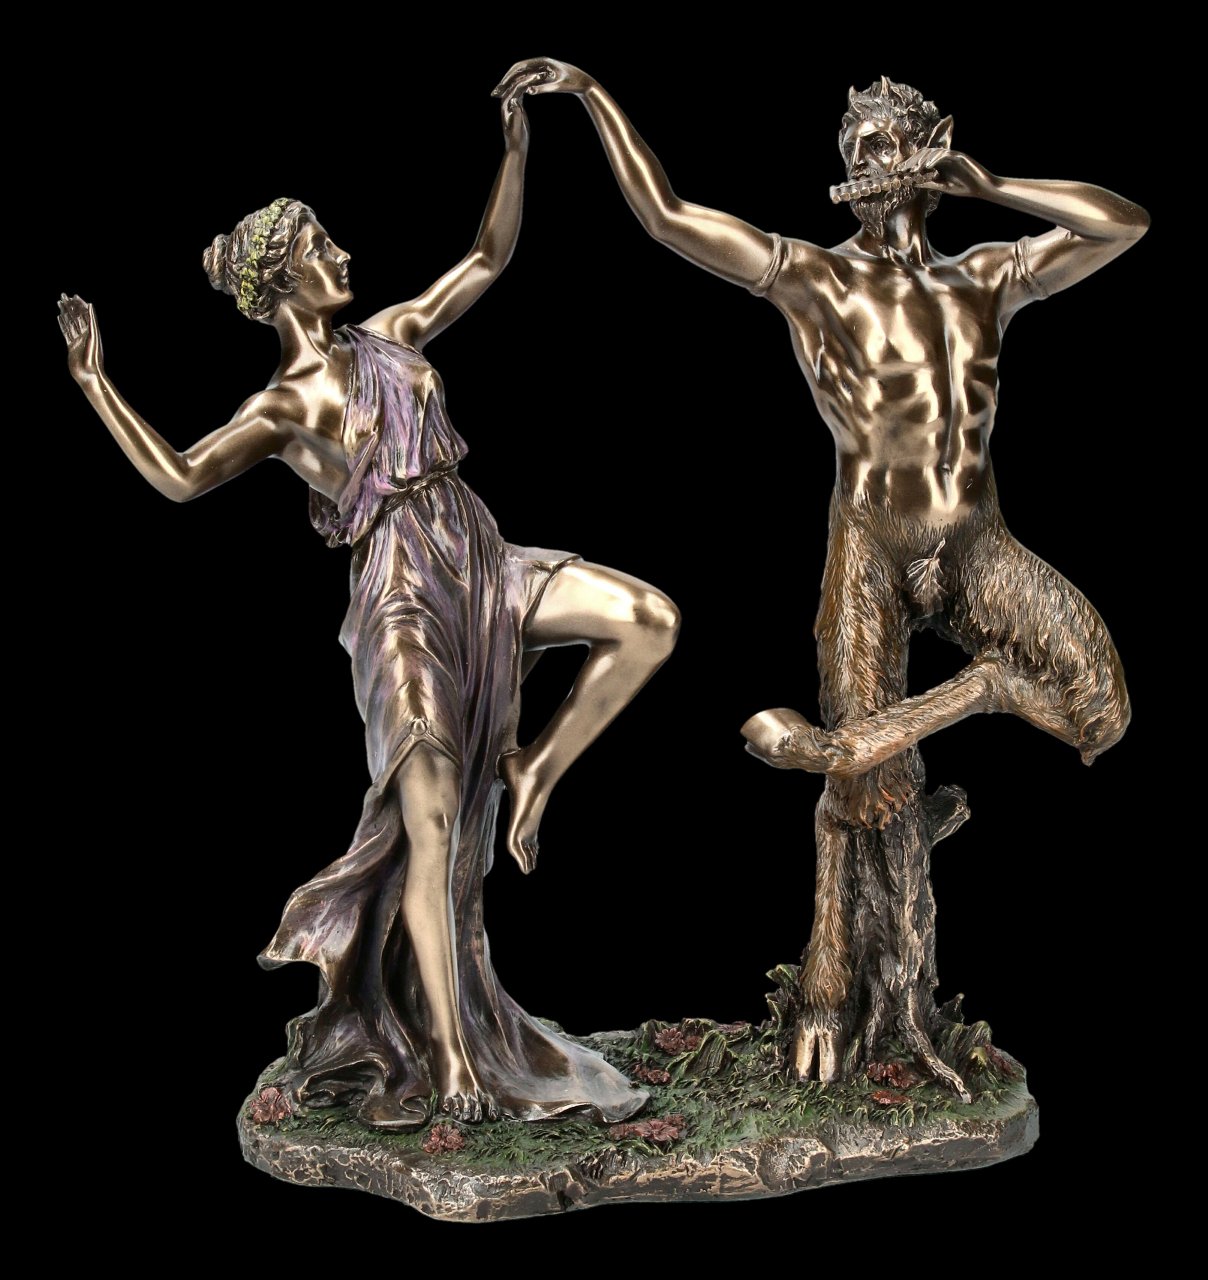 Pan Figurine is Dancing with a Nymph